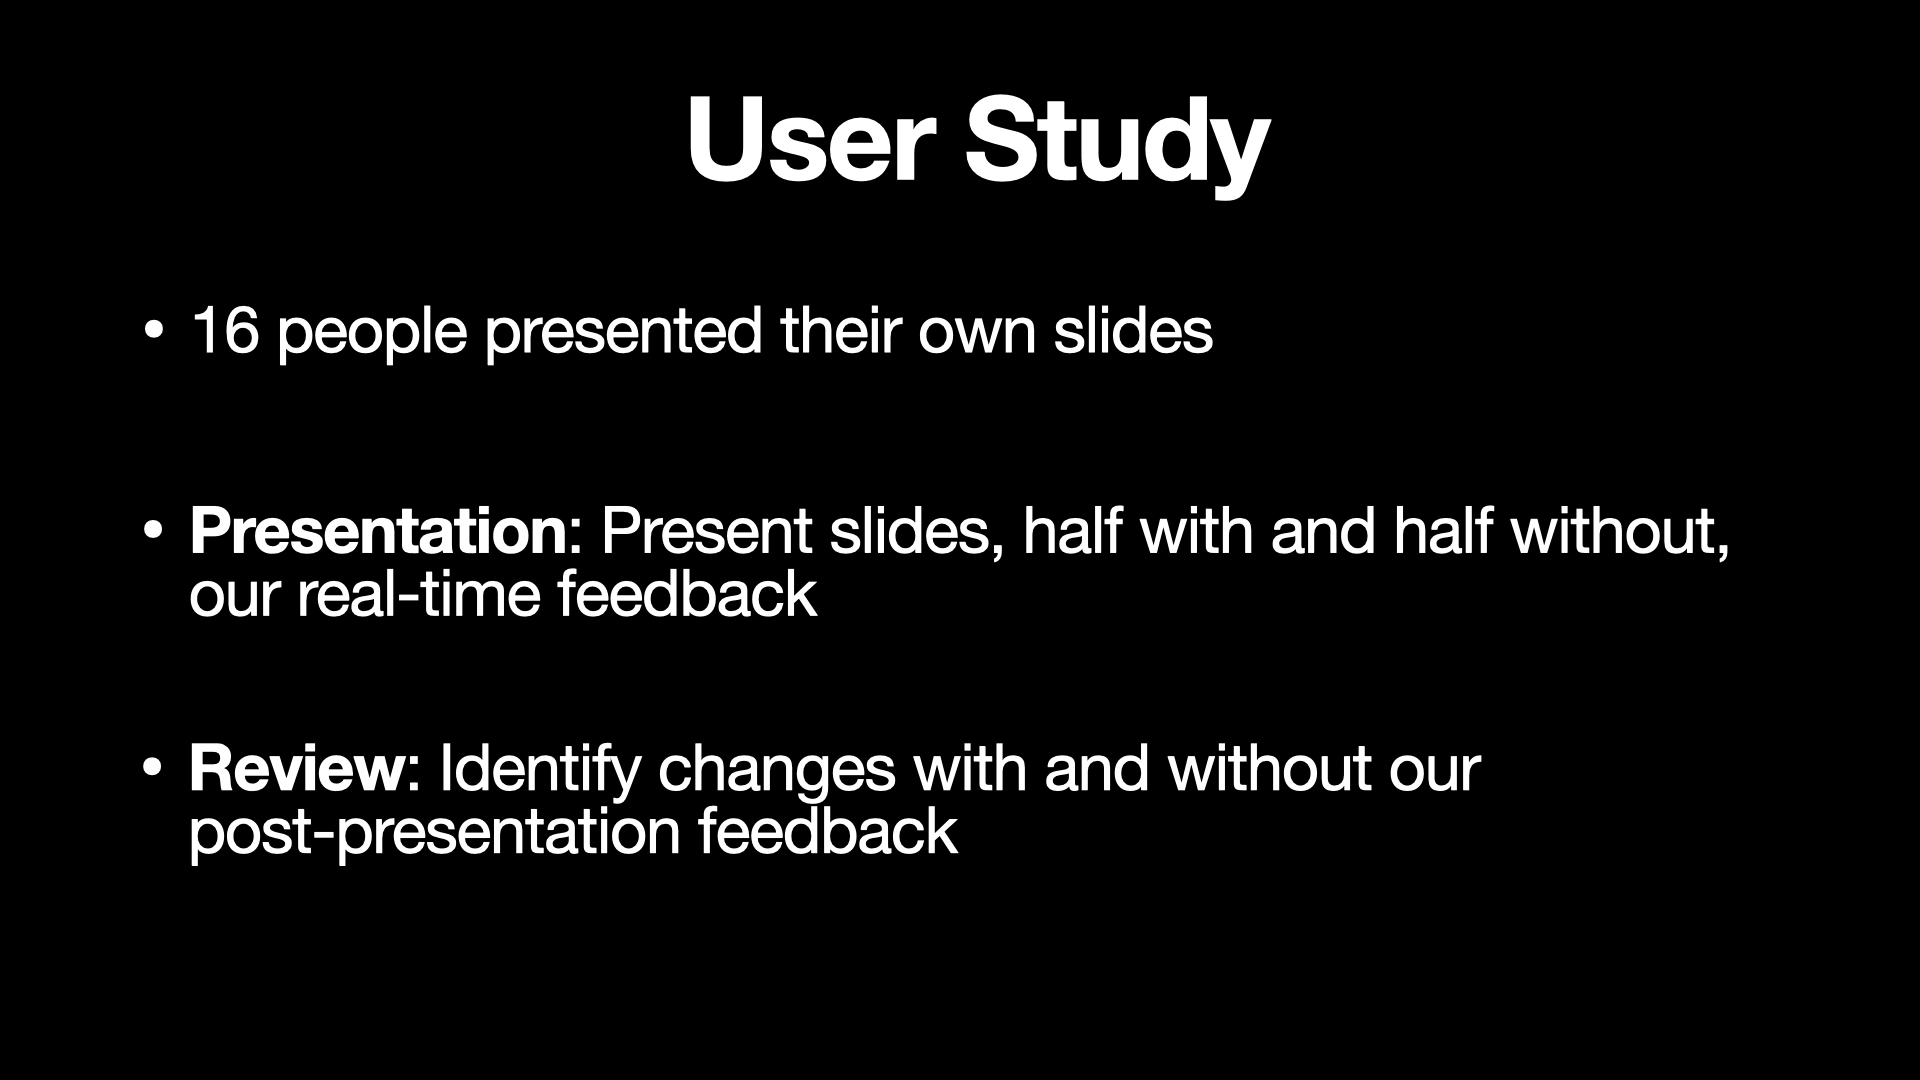 This slide shows the details of the user study. Title “User Study” is placed on the top center of the slide. Three bullet text items displayed below the title. The first text item is “16 people presented their own slides”. The second item is “Presentation: Present slides, half with and half without our real-time feedback”. The last item is “Review: identify changes with and without our post-presentation feedback”.